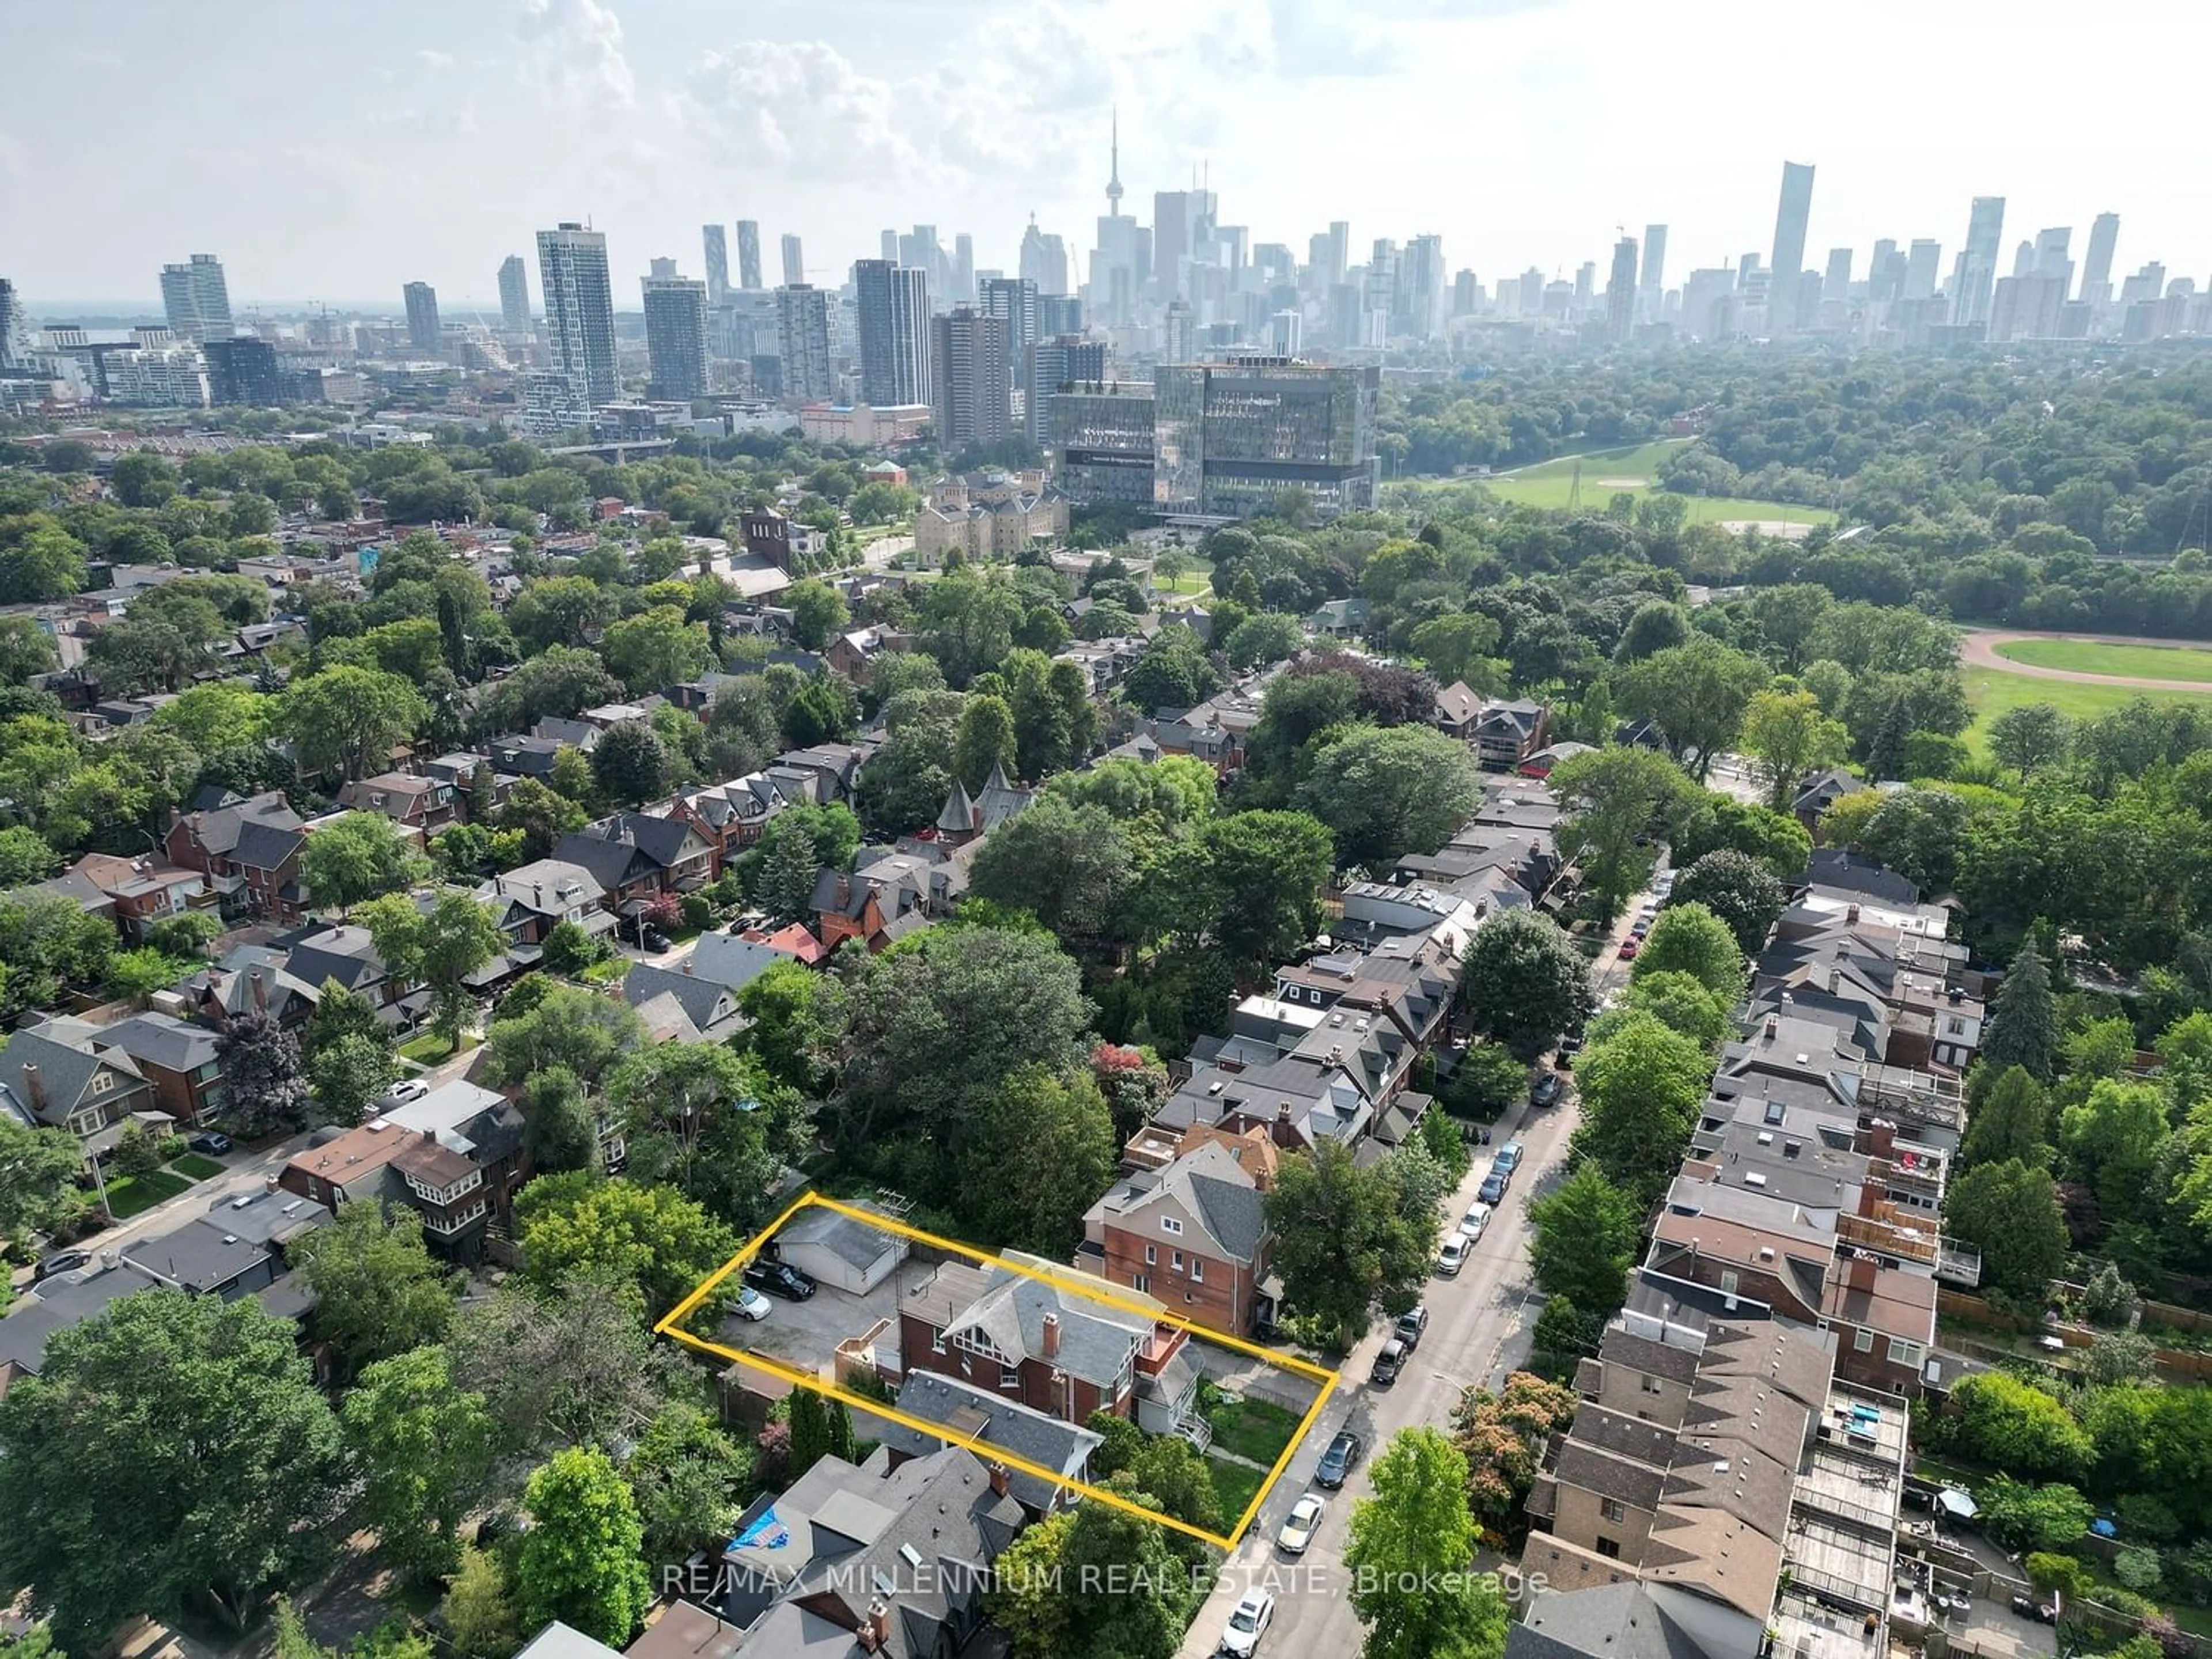 Lakeview for 43 Riverdale Ave, Toronto Ontario M4K 1C2